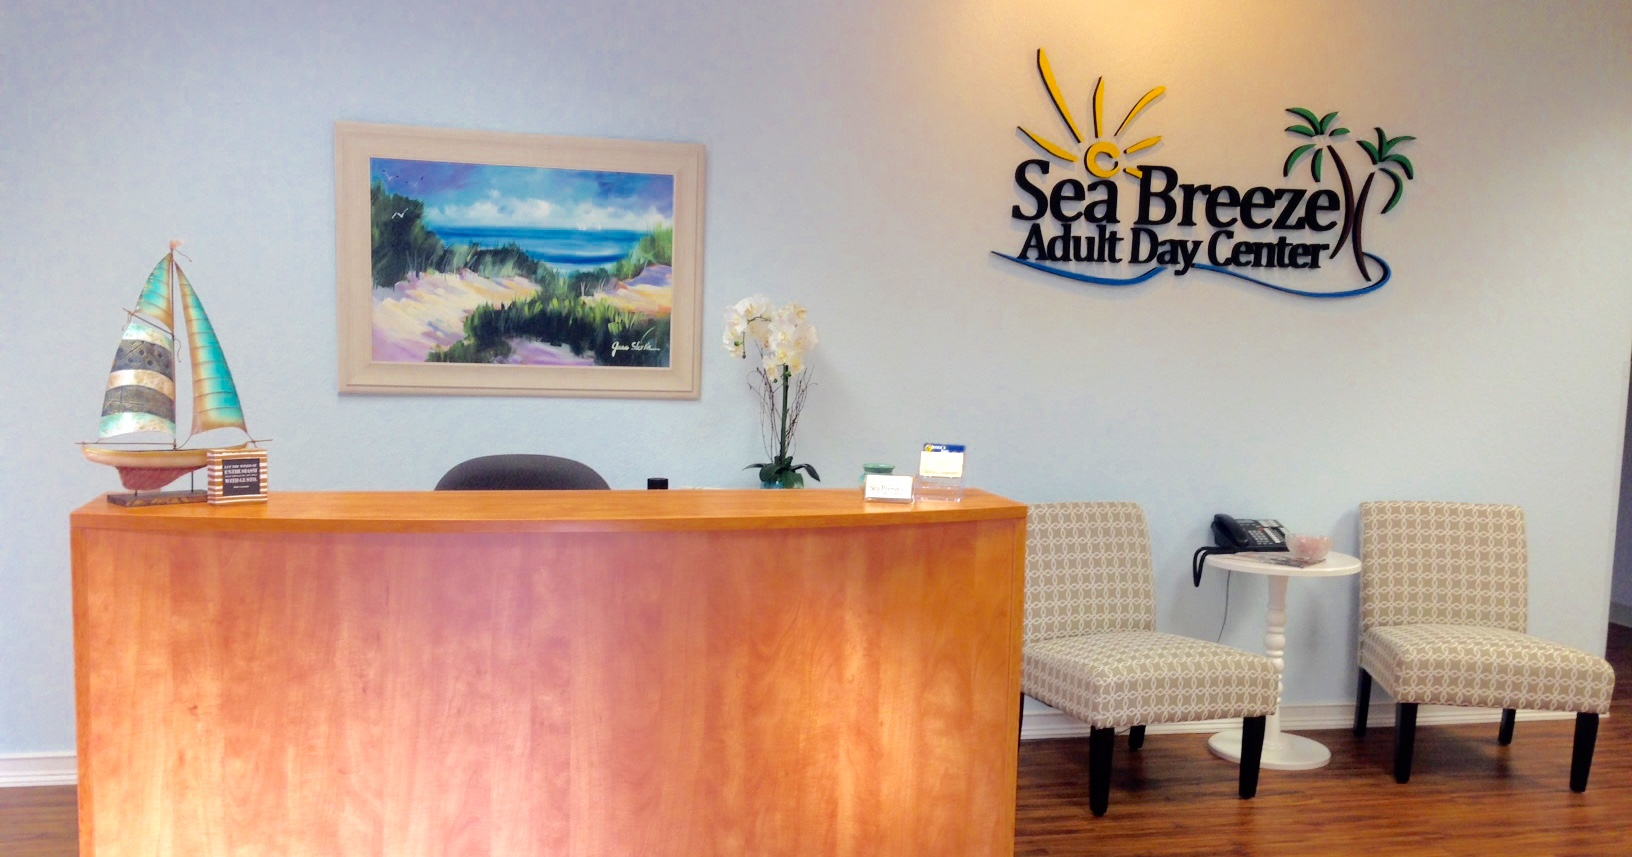 Sea Breeze Adult Day Center  image